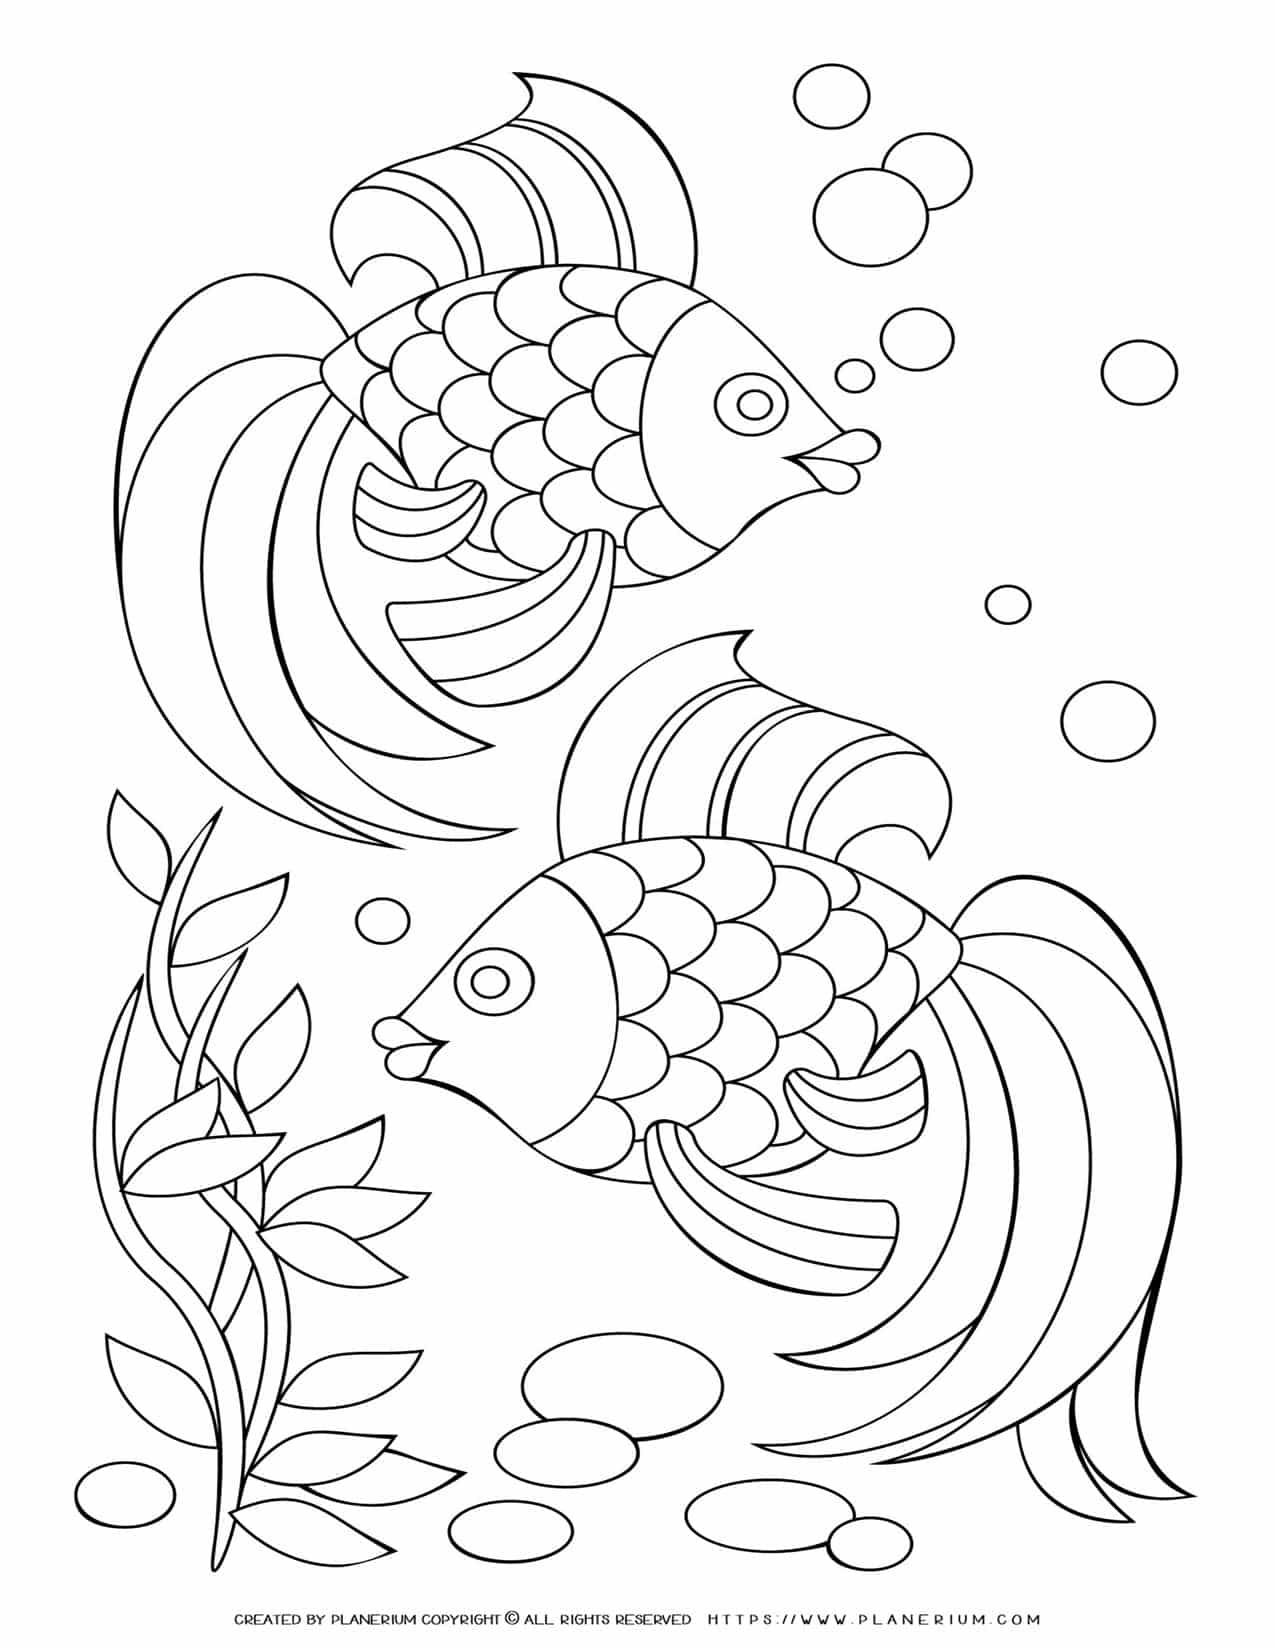 Detailed underwater scene with two fish coloring page for kids.